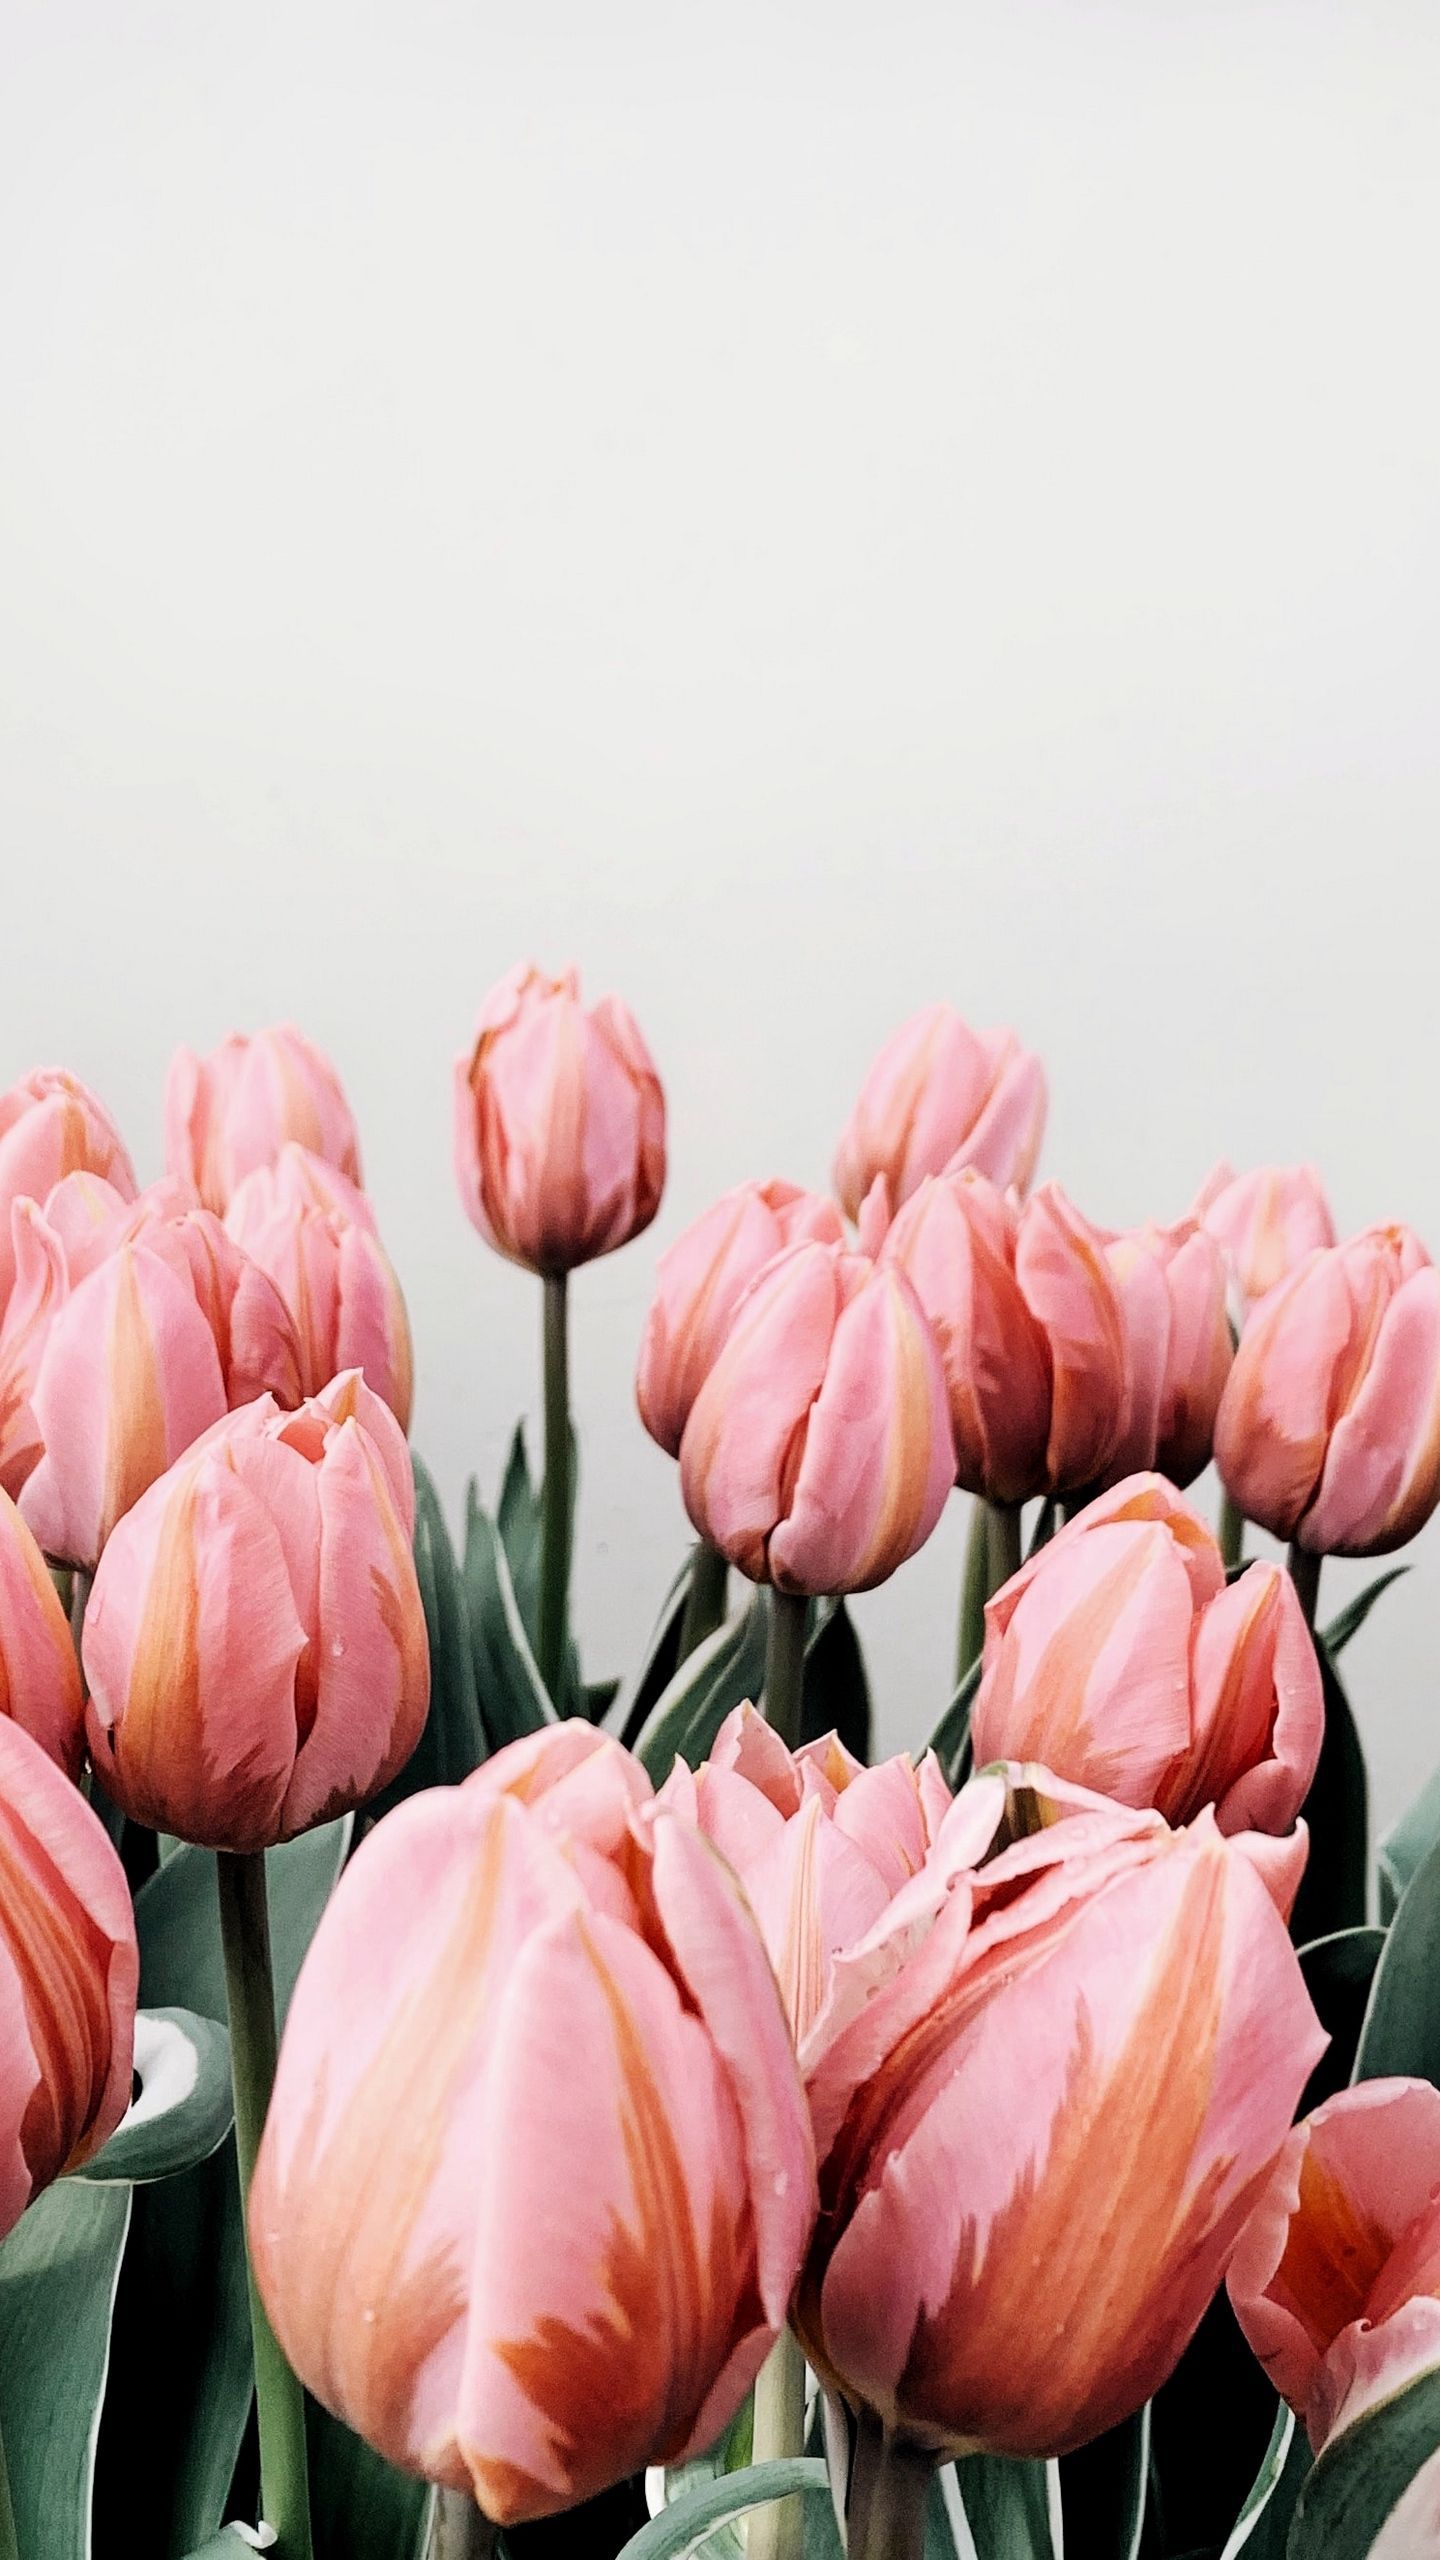 A bunch of pink tulips in the ground - Tulip